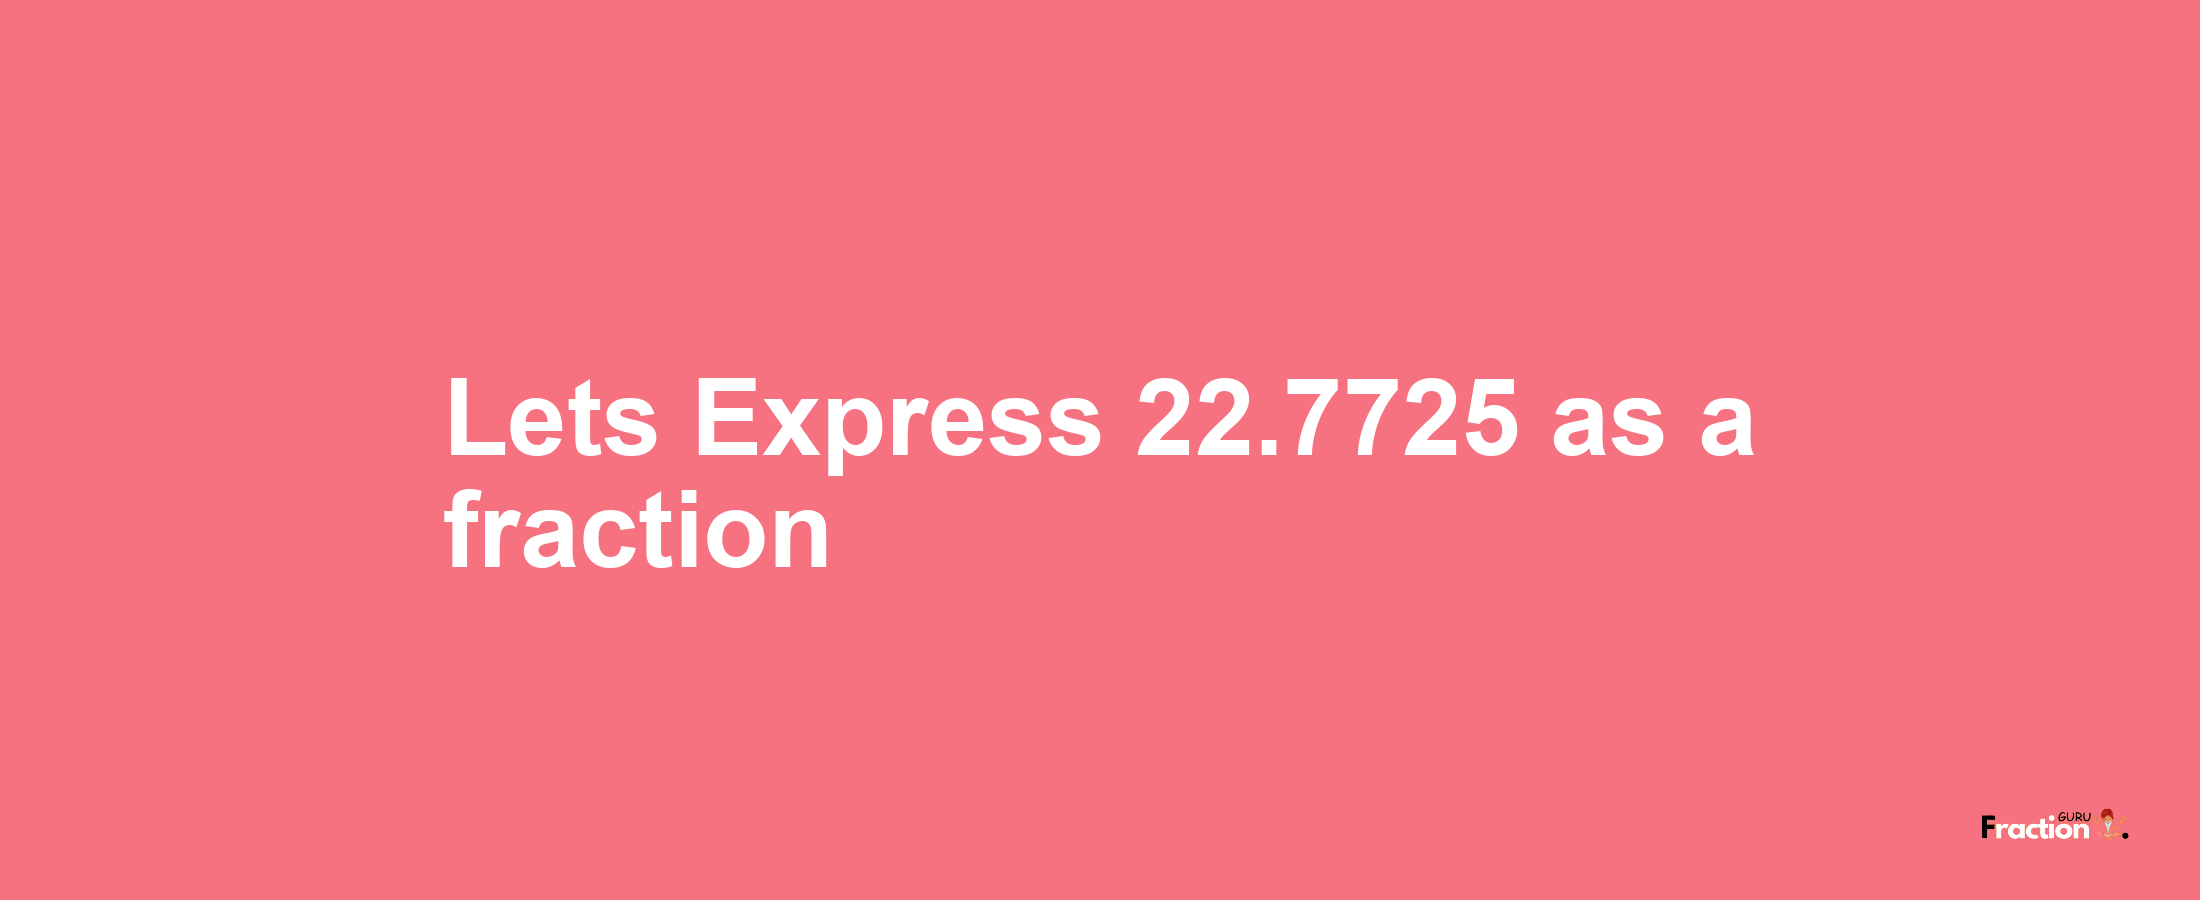 Lets Express 22.7725 as afraction